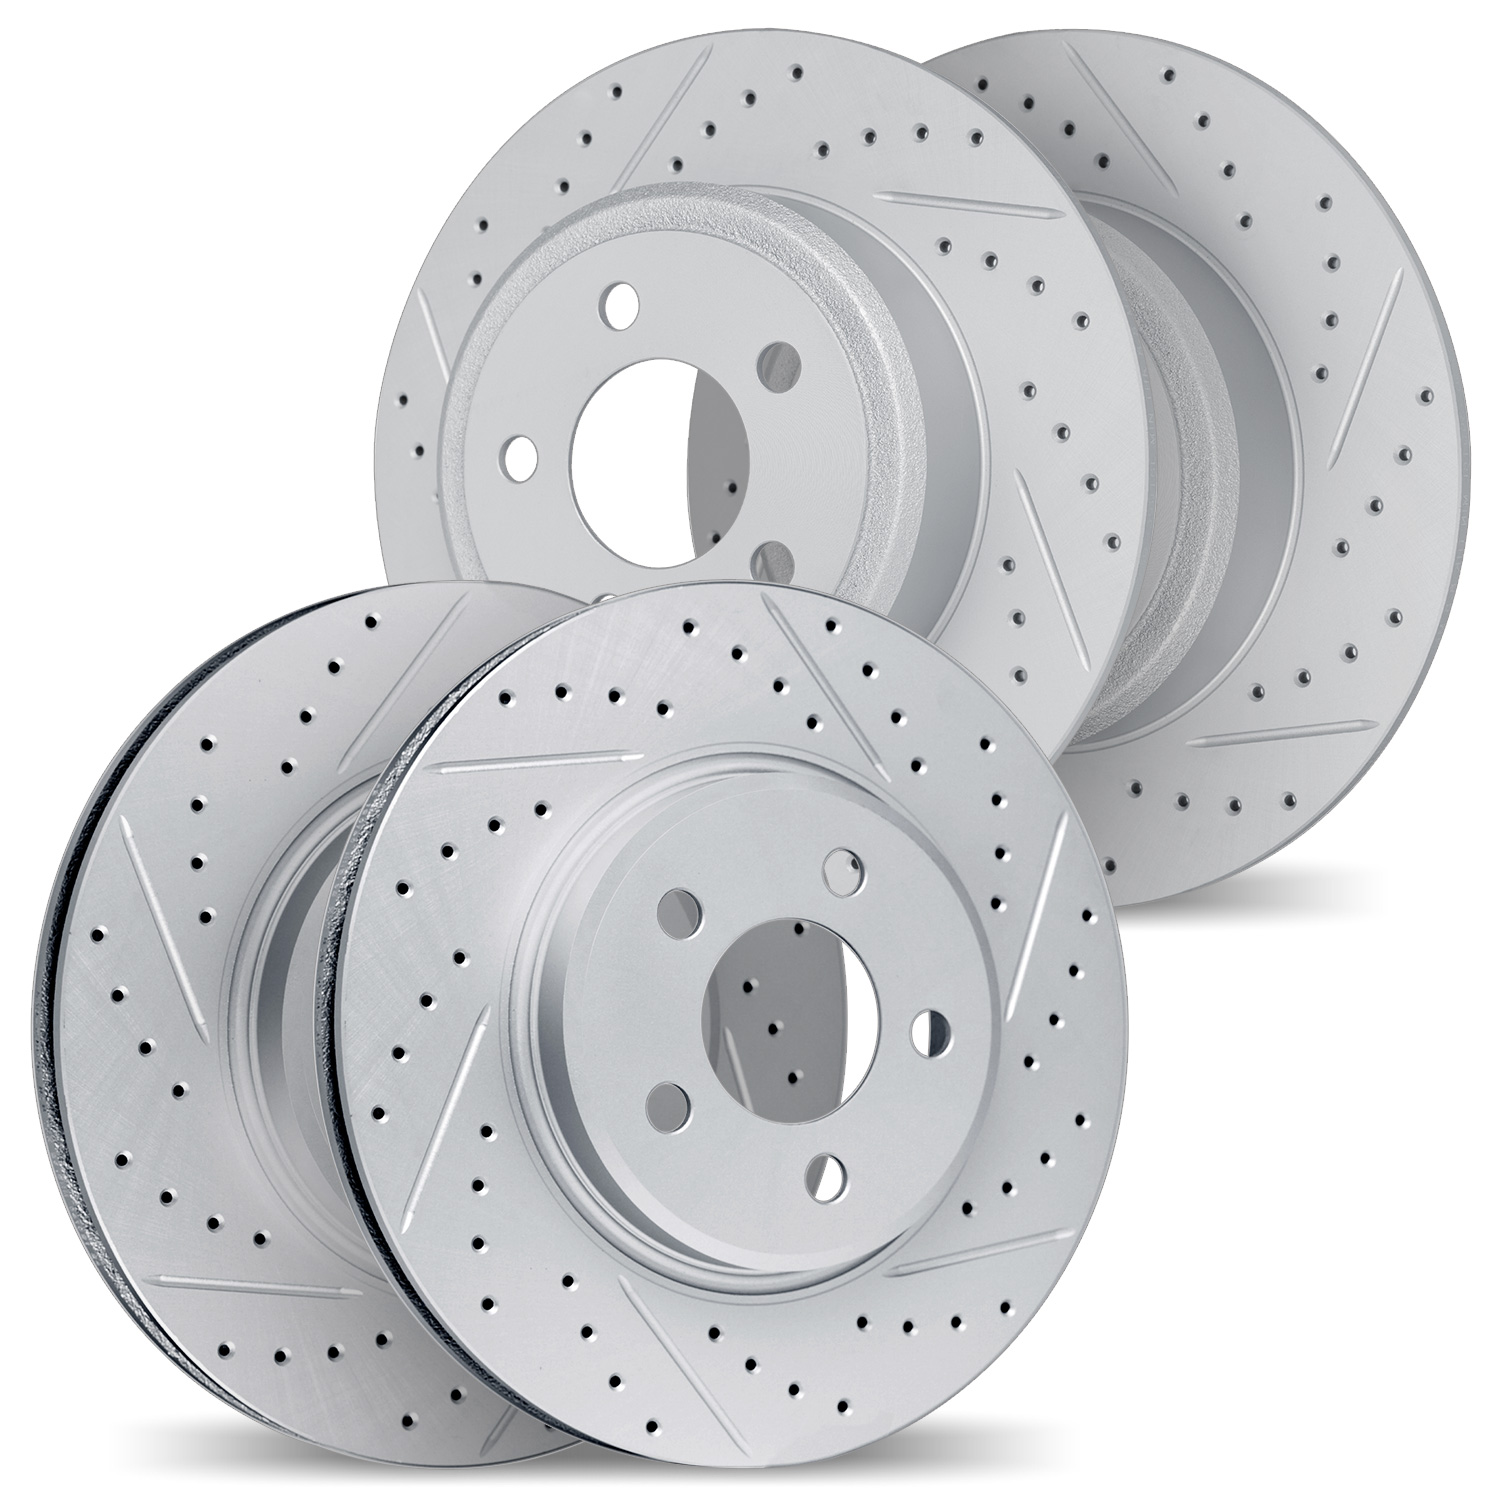 2004-59016 Geoperformance Drilled/Slotted Brake Rotors, 2002-2006 Acura/Honda, Position: Front and Rear